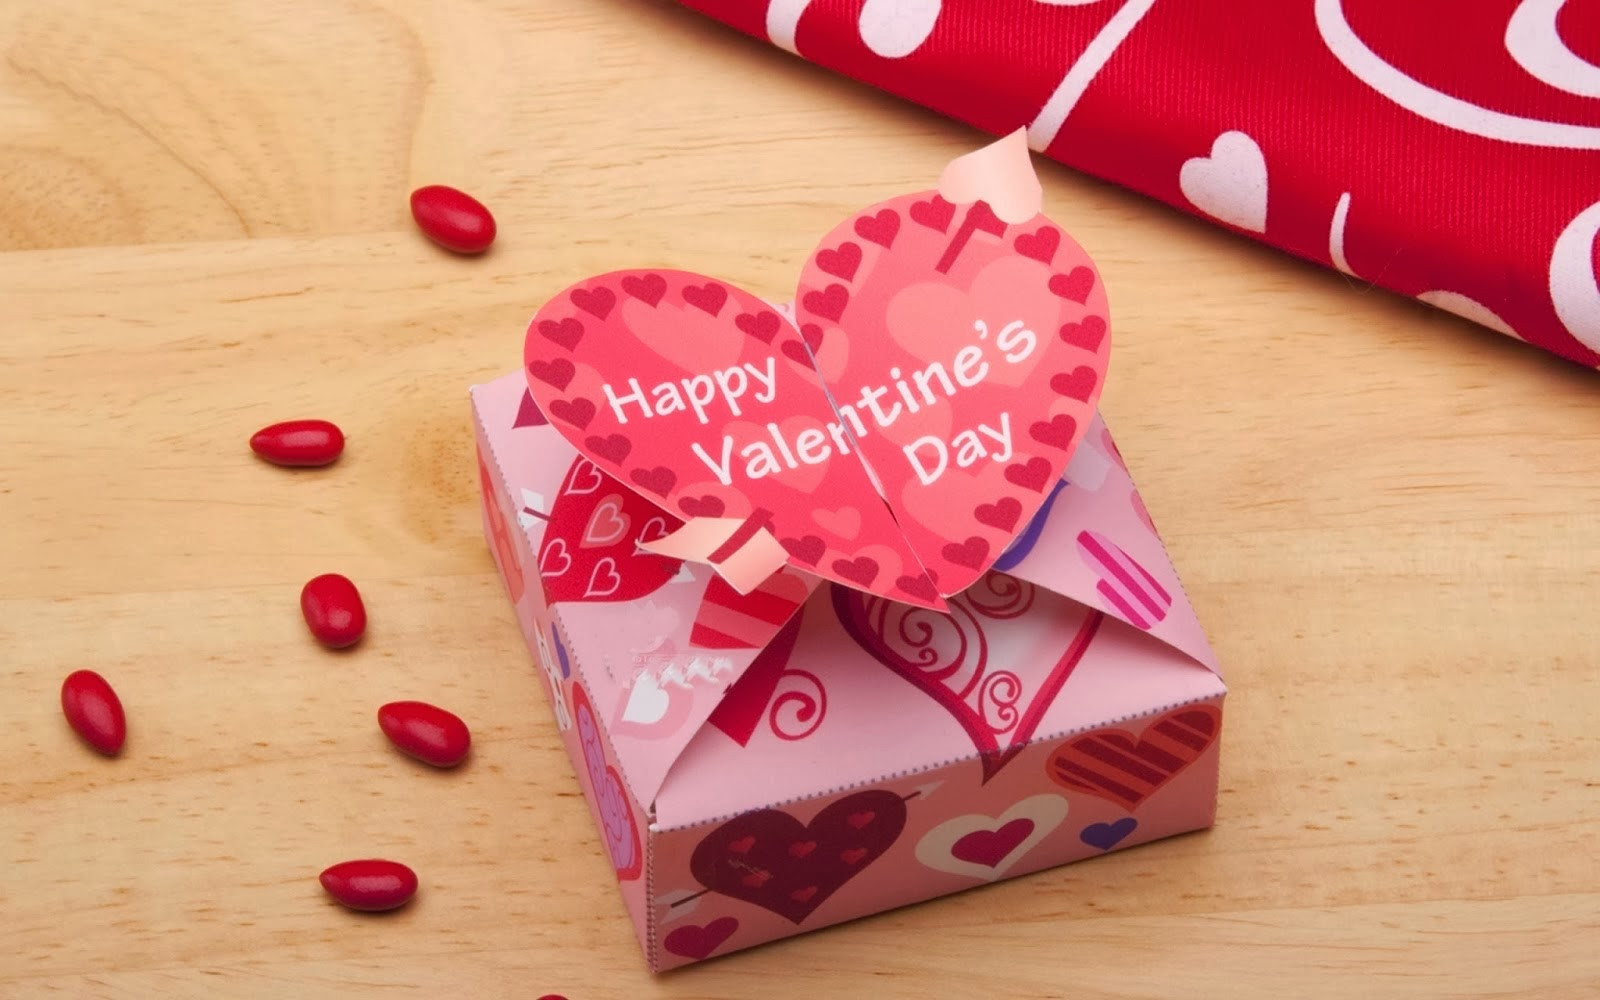 Ideas For Valentines Day 2019
 Best Valentine’s Day Gifts Ideas for Brother 2019 A Bud